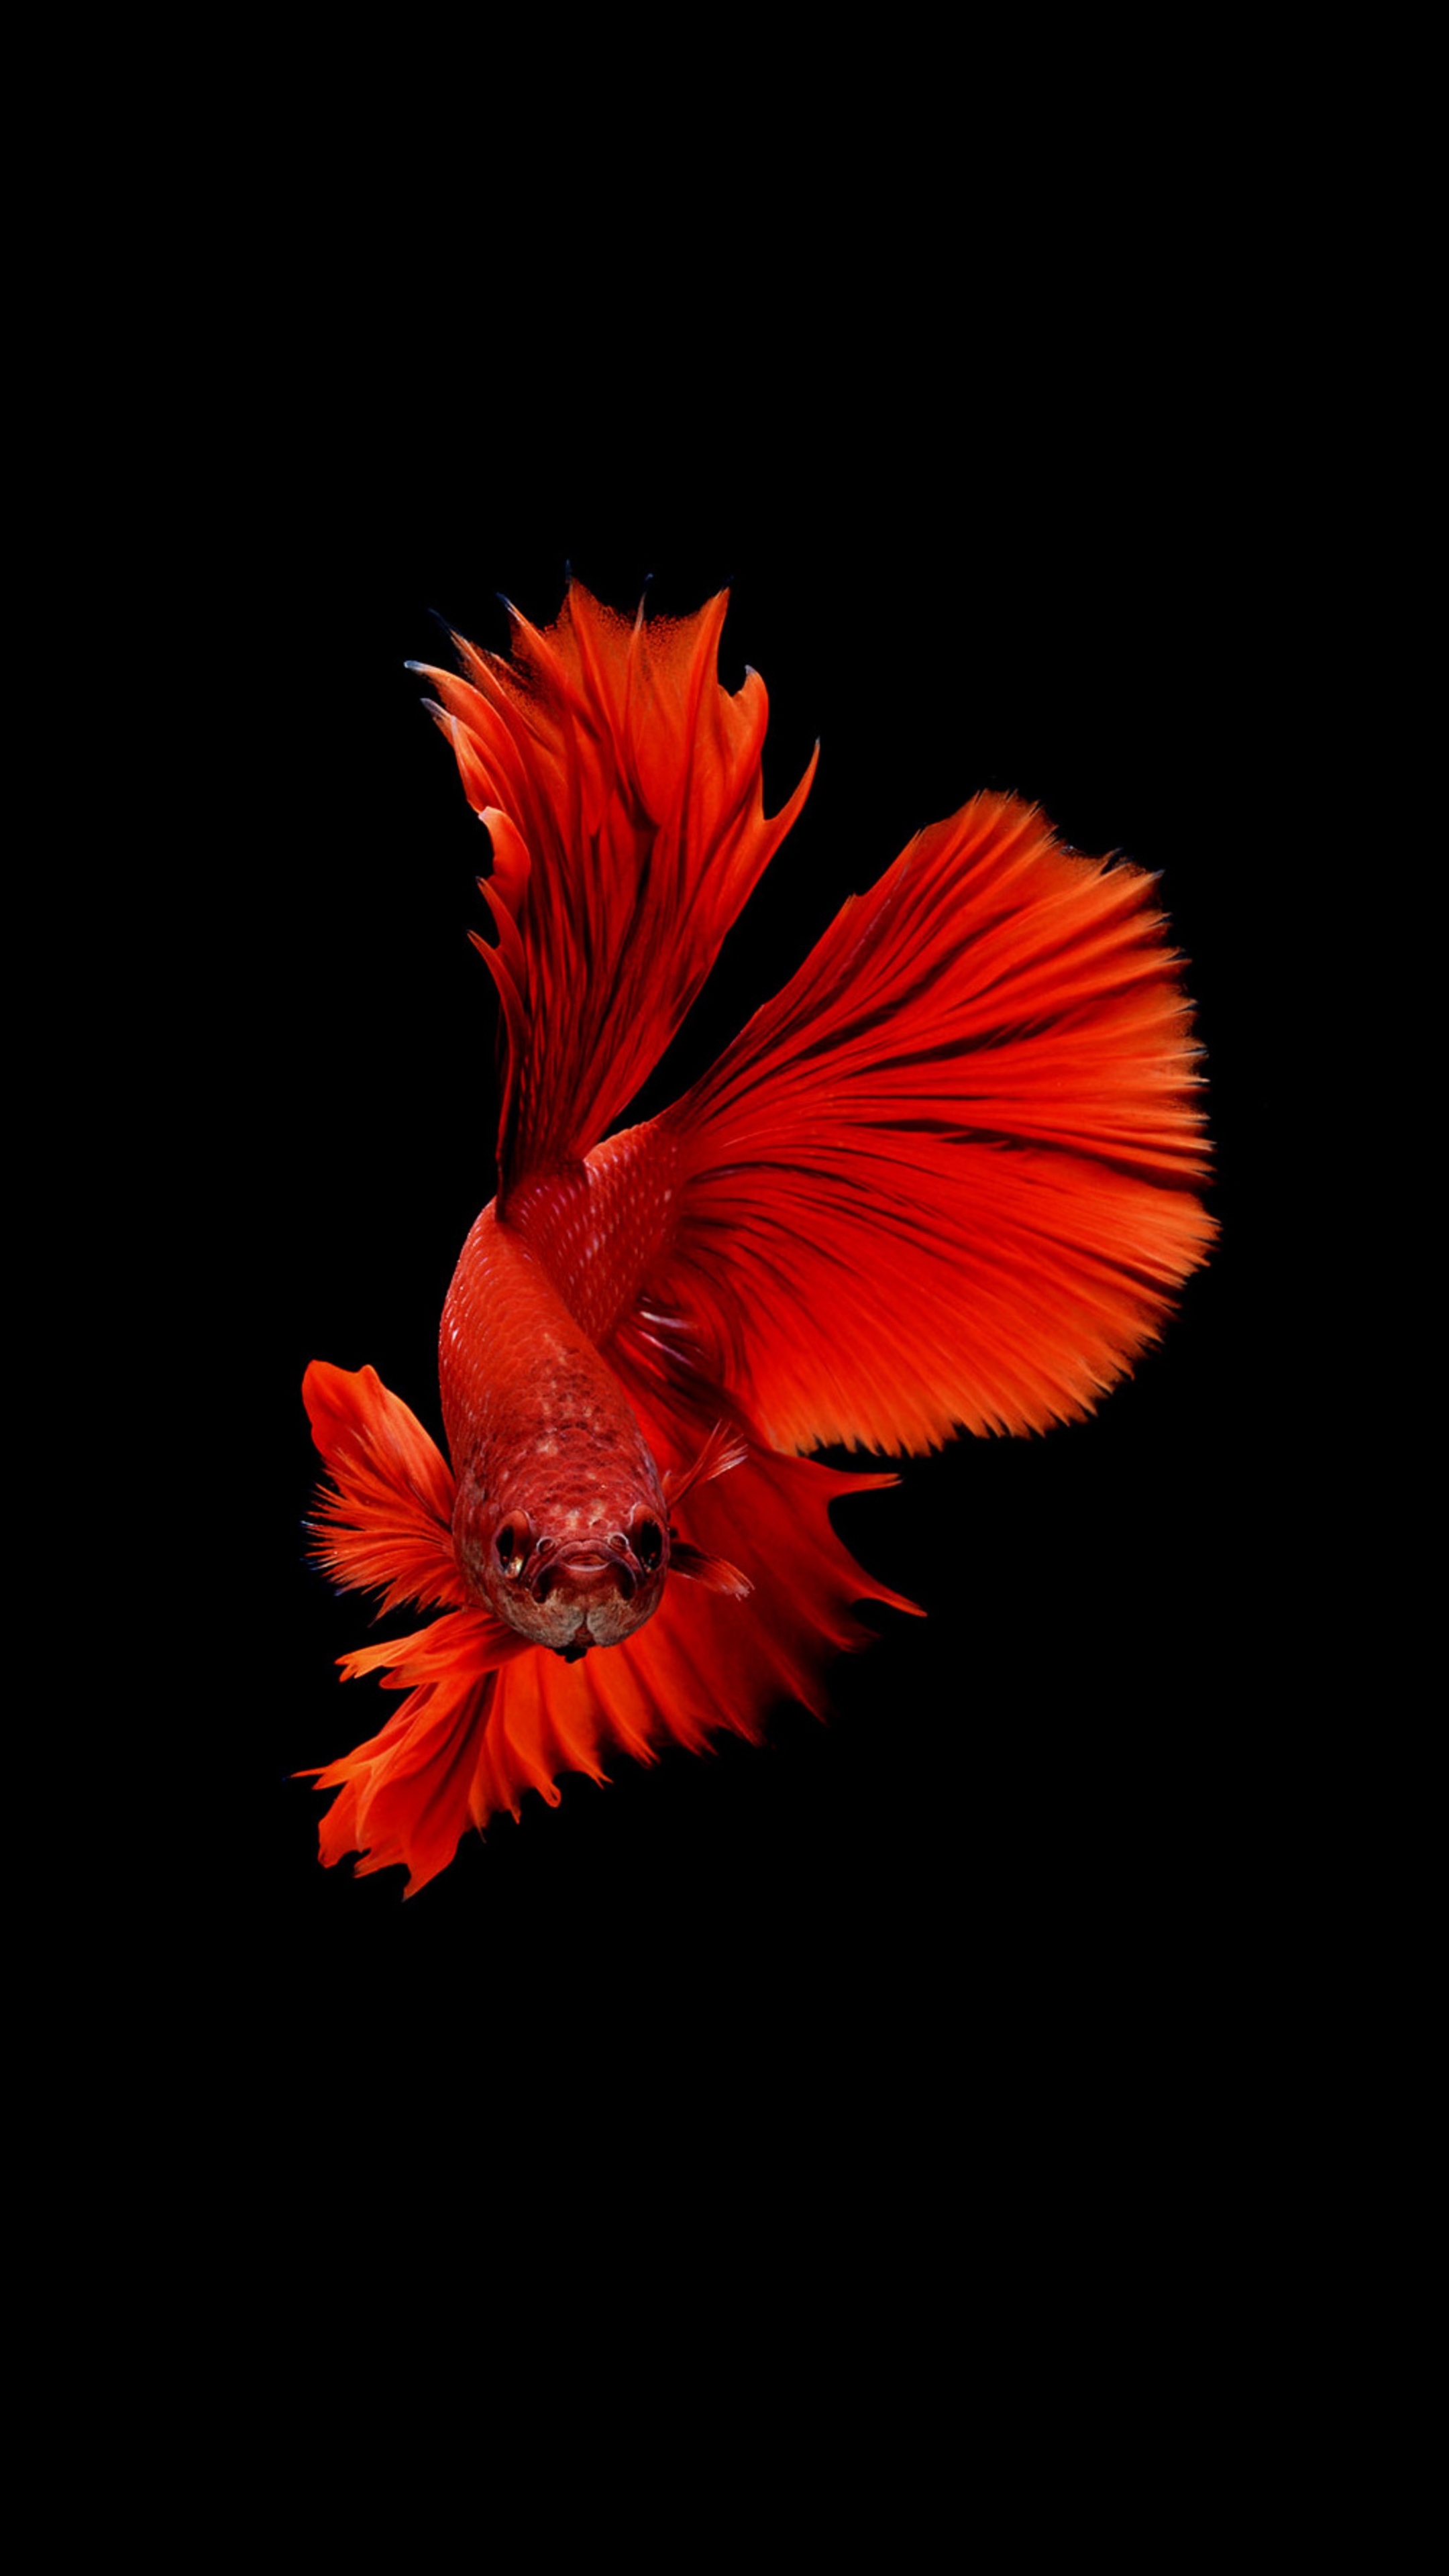 Betta fish Sony Xperia wallpapers, High-quality images, Elegant and vibrant, Stunning betta photography, 2160x3840 4K Handy